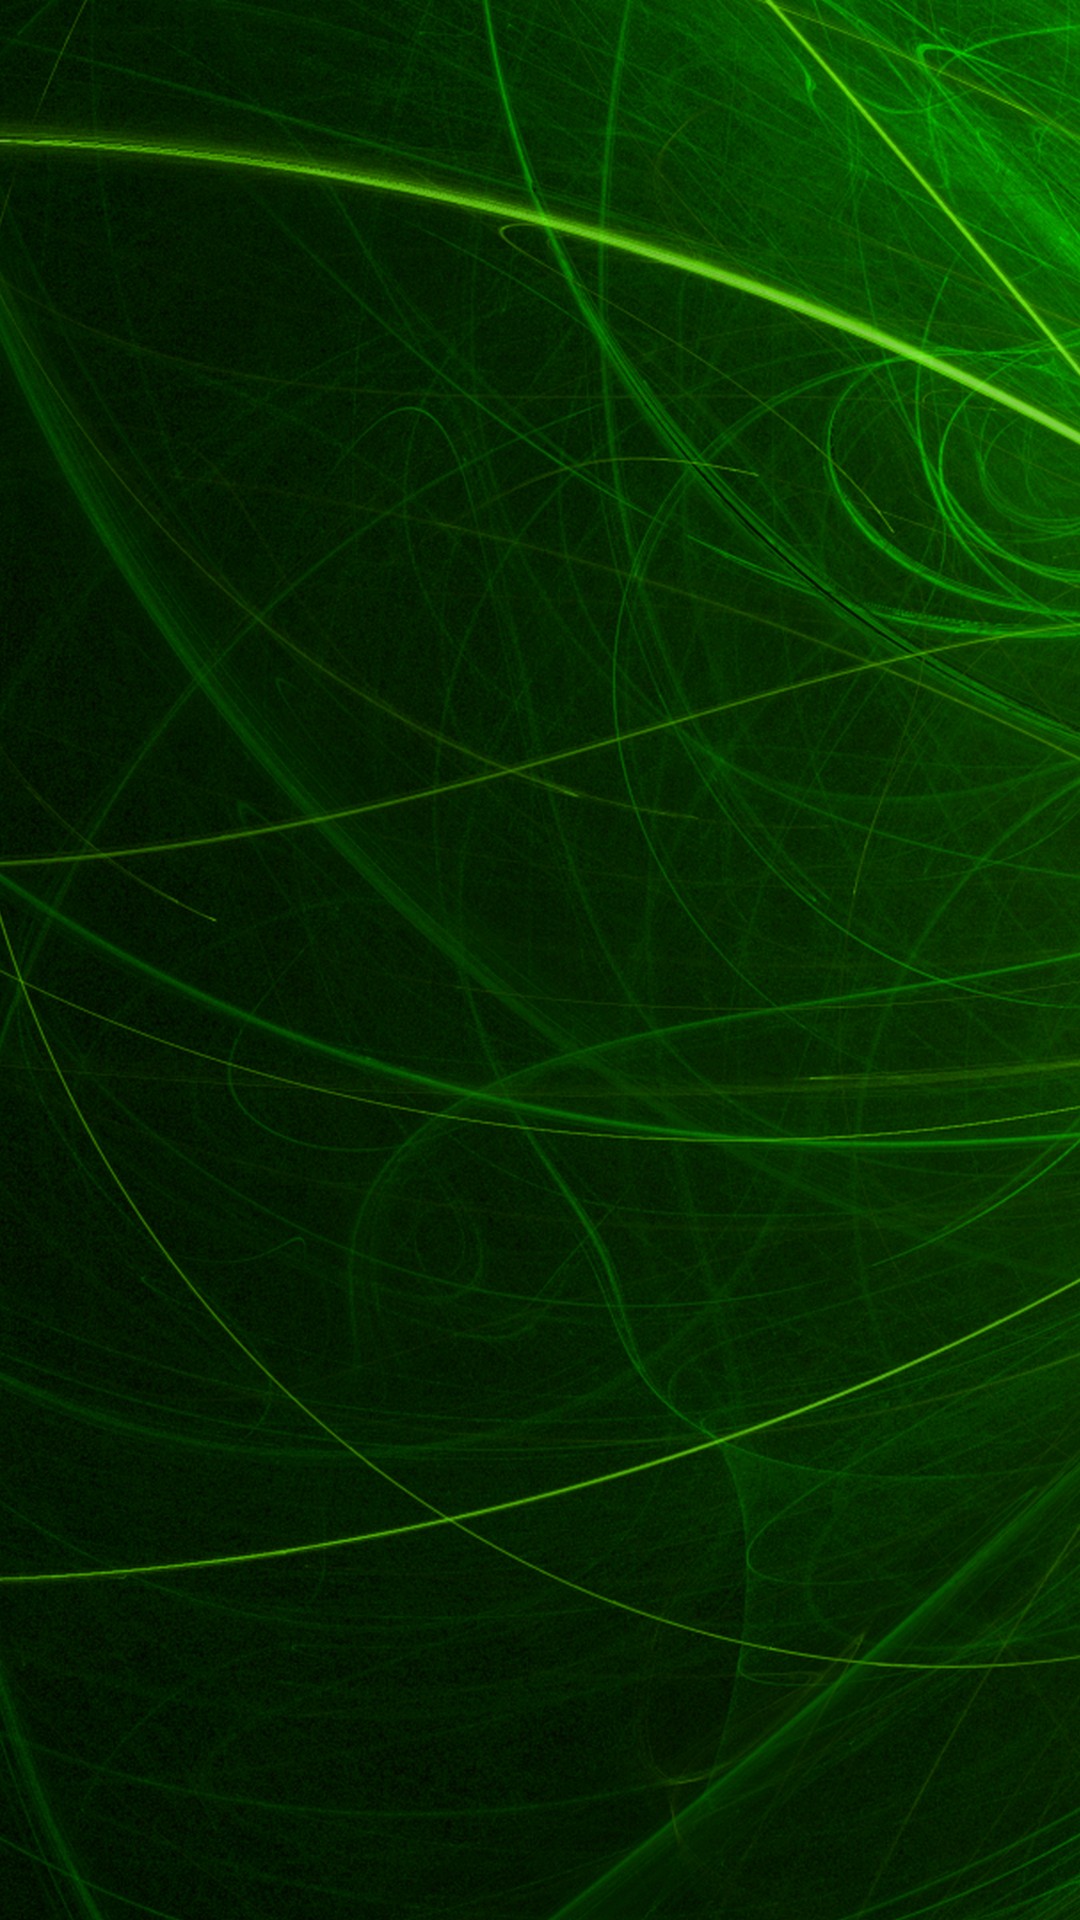 Black and Green Android Wallpaper with image resolution 1080x1920 pixel. You can make this wallpaper for your Android backgrounds, Tablet, Smartphones Screensavers and Mobile Phone Lock Screen